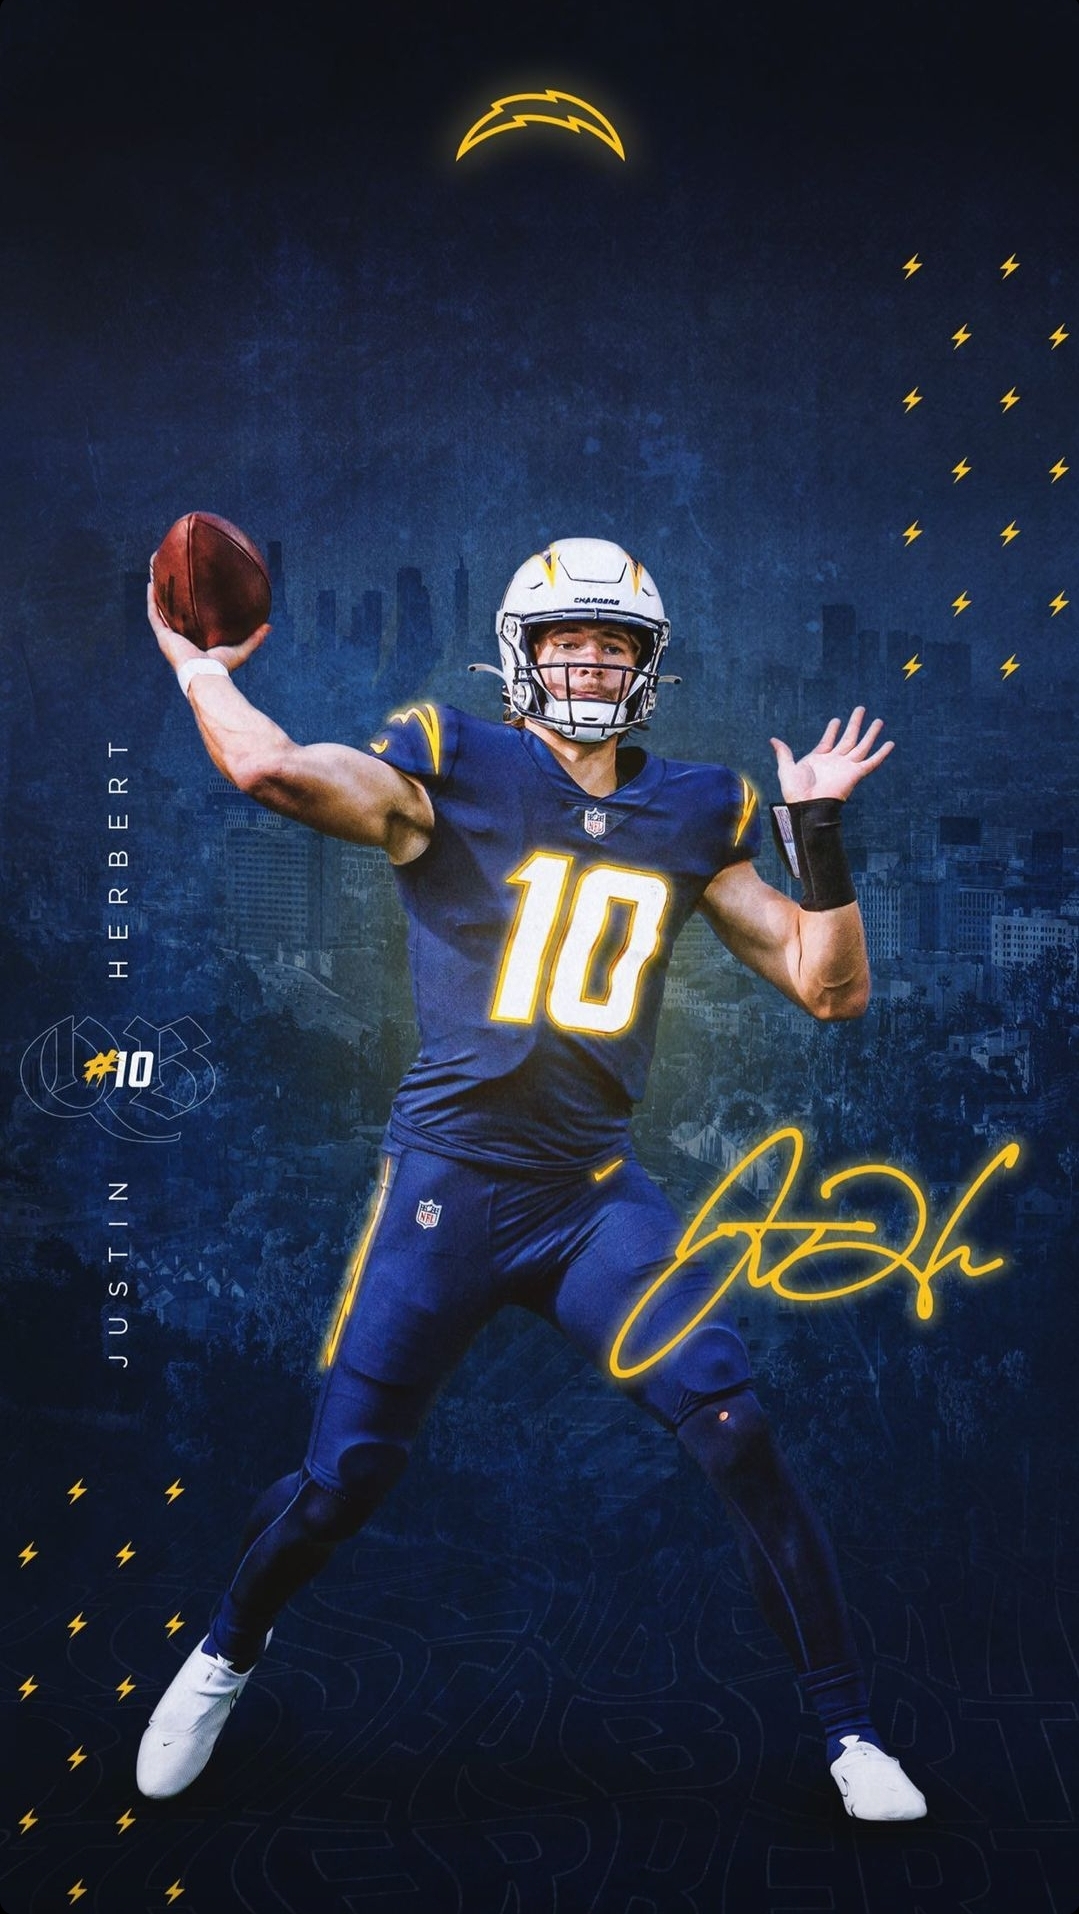 University of Oregon Alumni Association - The LA Chargers made this amazing  mobile phone wallpaper of Justin Herbert just in time for Halloween! If  your idea of a good time is spending